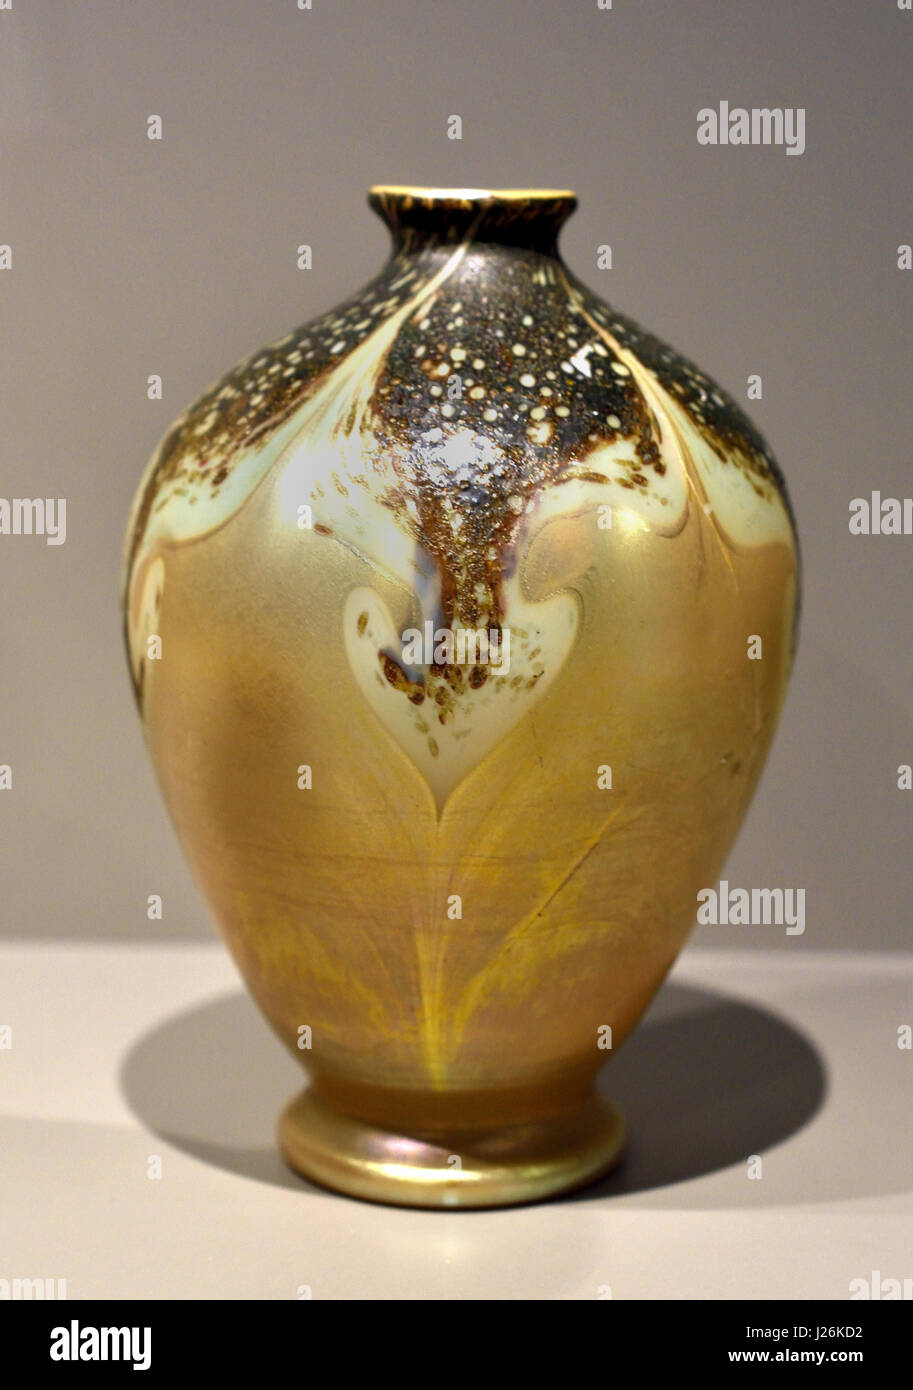 Vase from the series CYPRIOTE 1899 by Louis Comfort Tiffany 1848 –1933  Art Deco Art Nouveau  New York , American, United States of America, USA,  ( Artist and designer who worked in the decorative arts and is best known for his work in stained glass ) Stock Photo